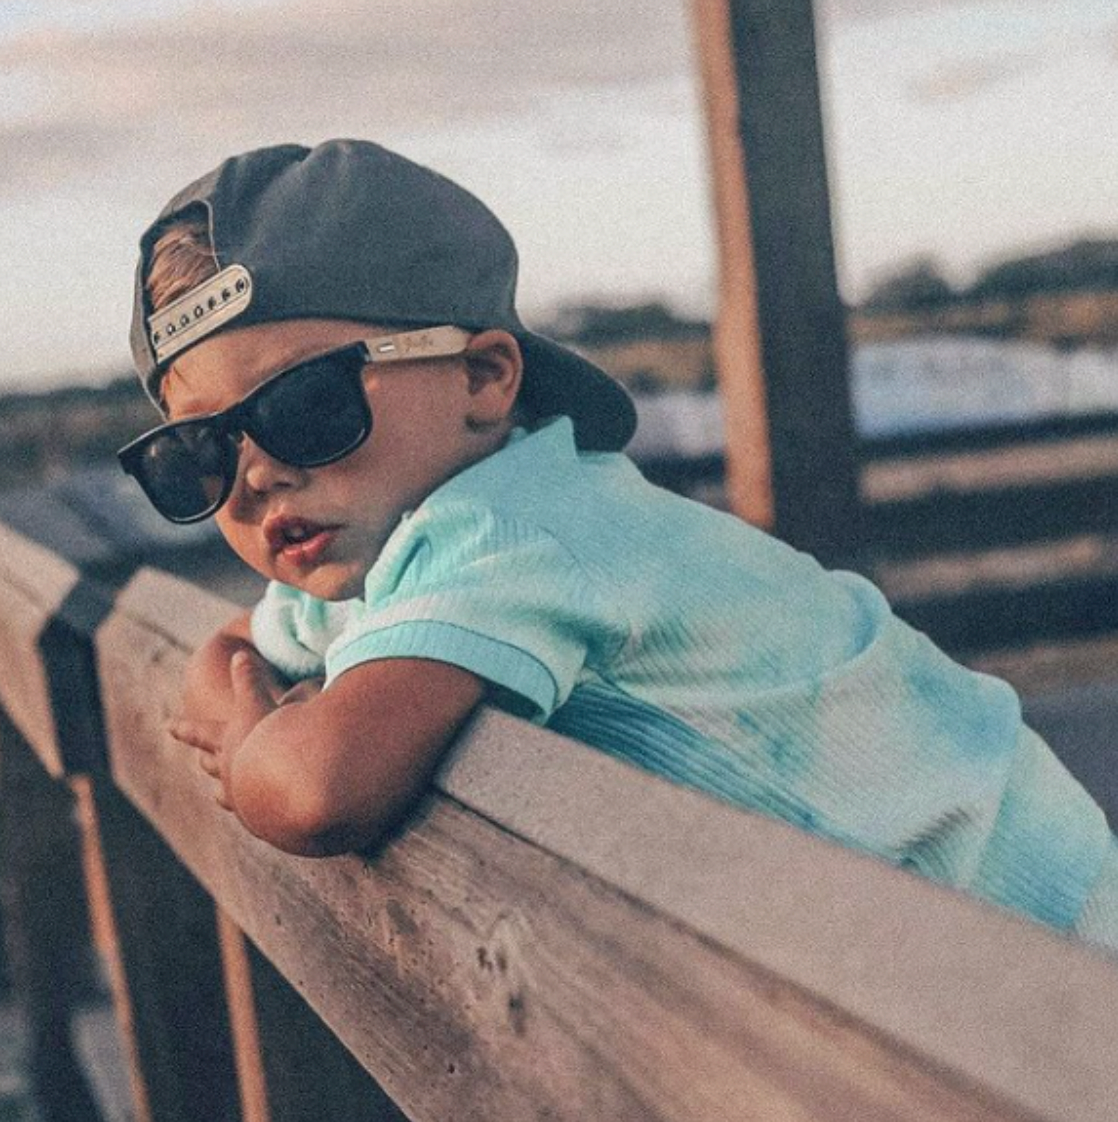 baby with binkybro sunglasses and snapback leaning over edge